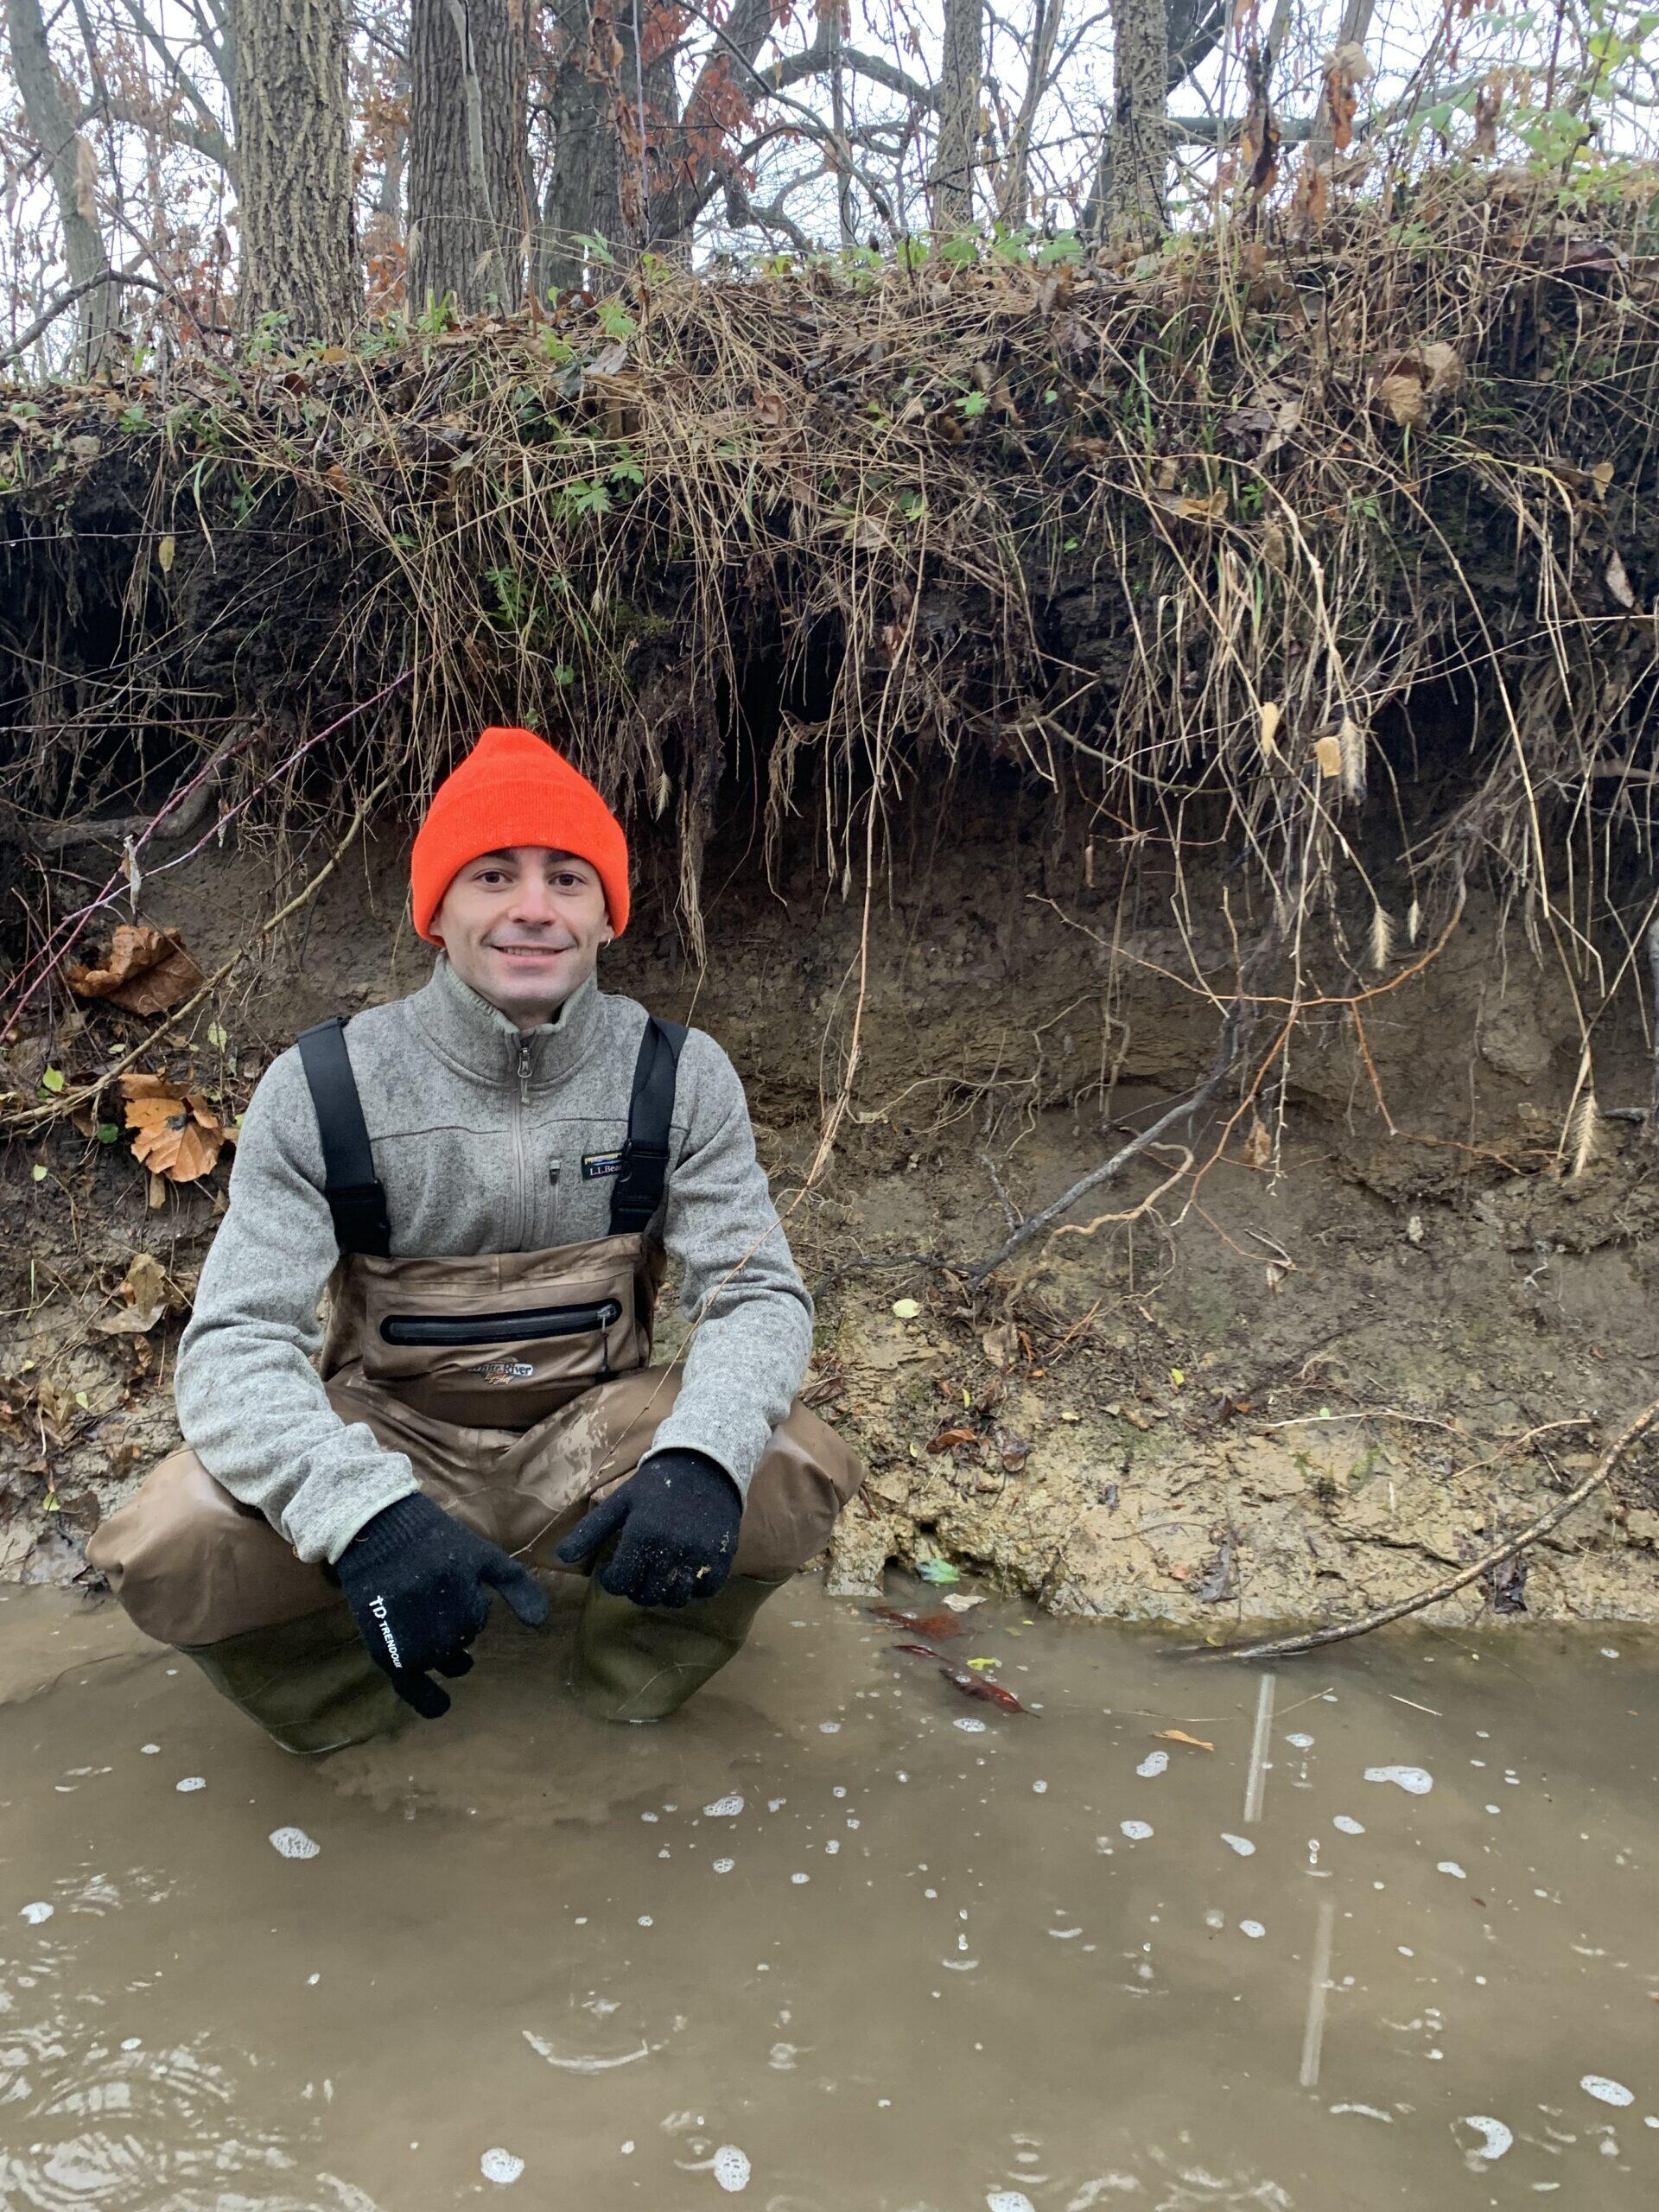 Andrew Margenot next to undercut streambank in Coles County, Ill.